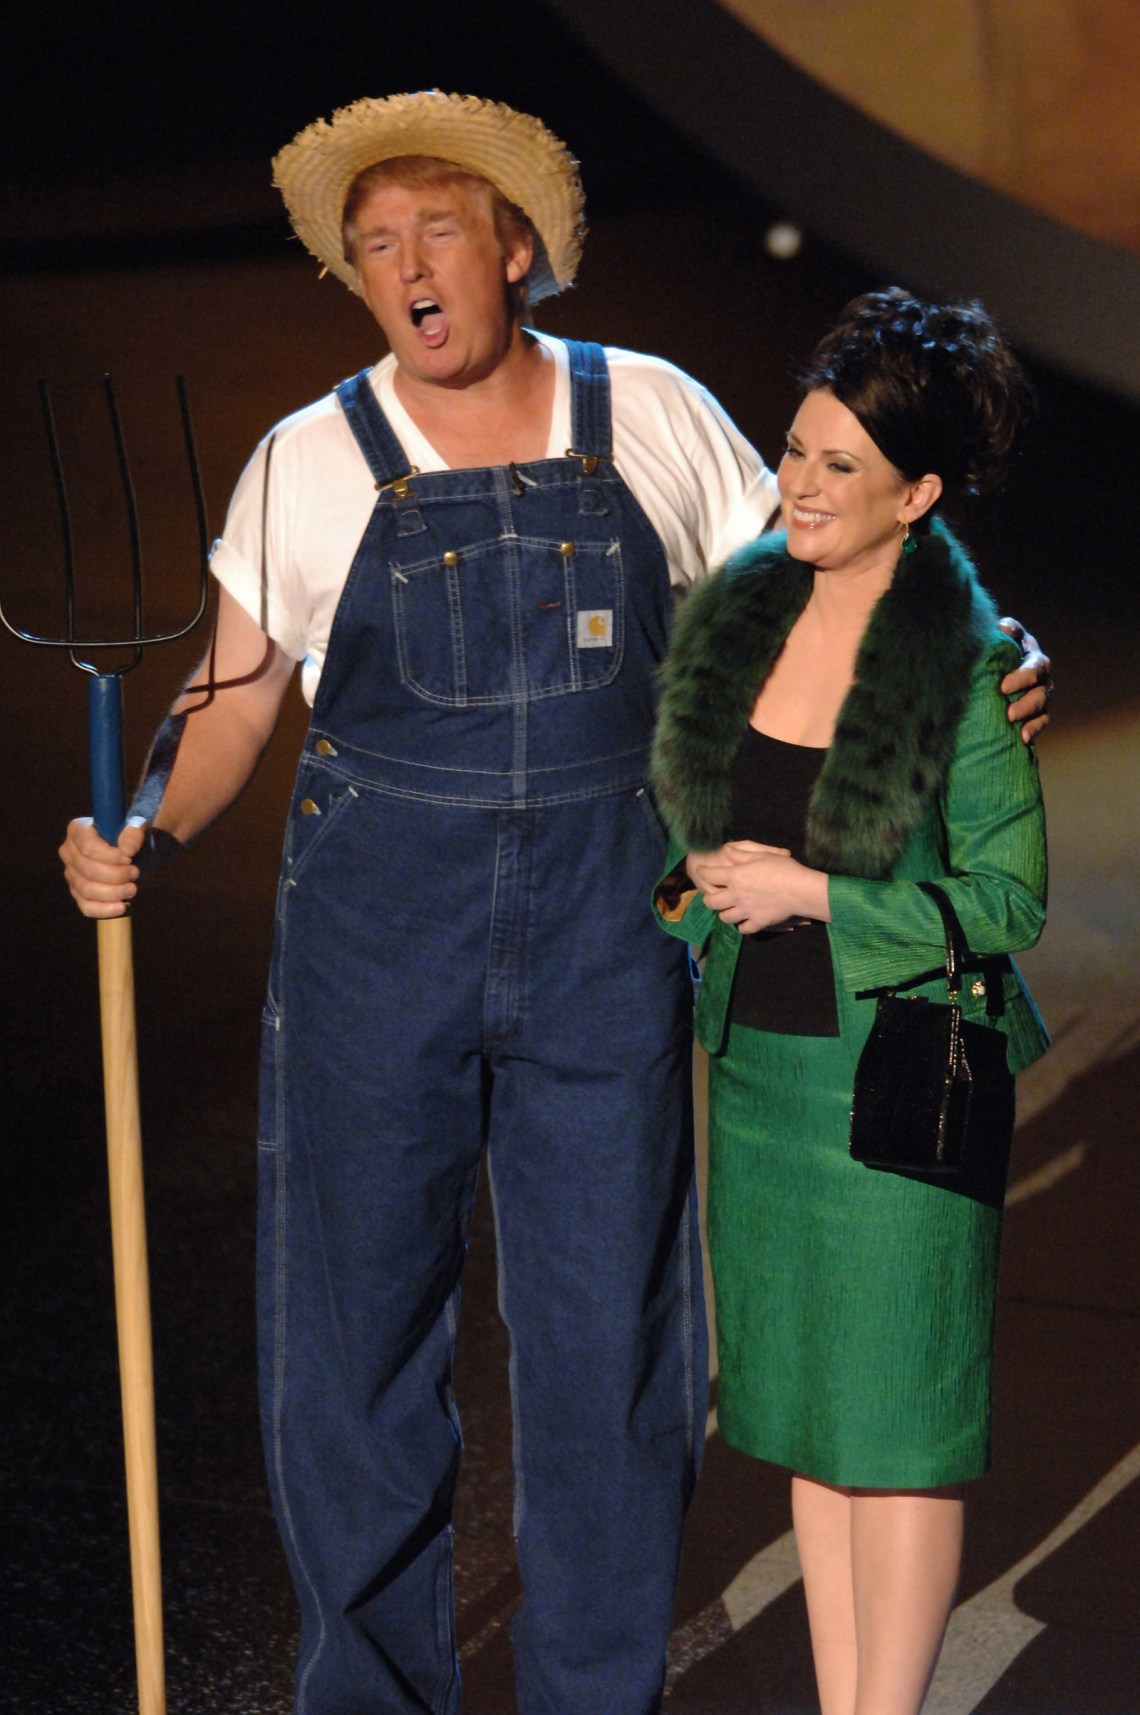 Donald Trump and Megan Mullally performing the Green Acres theme song at the Emmy Awards, 2005